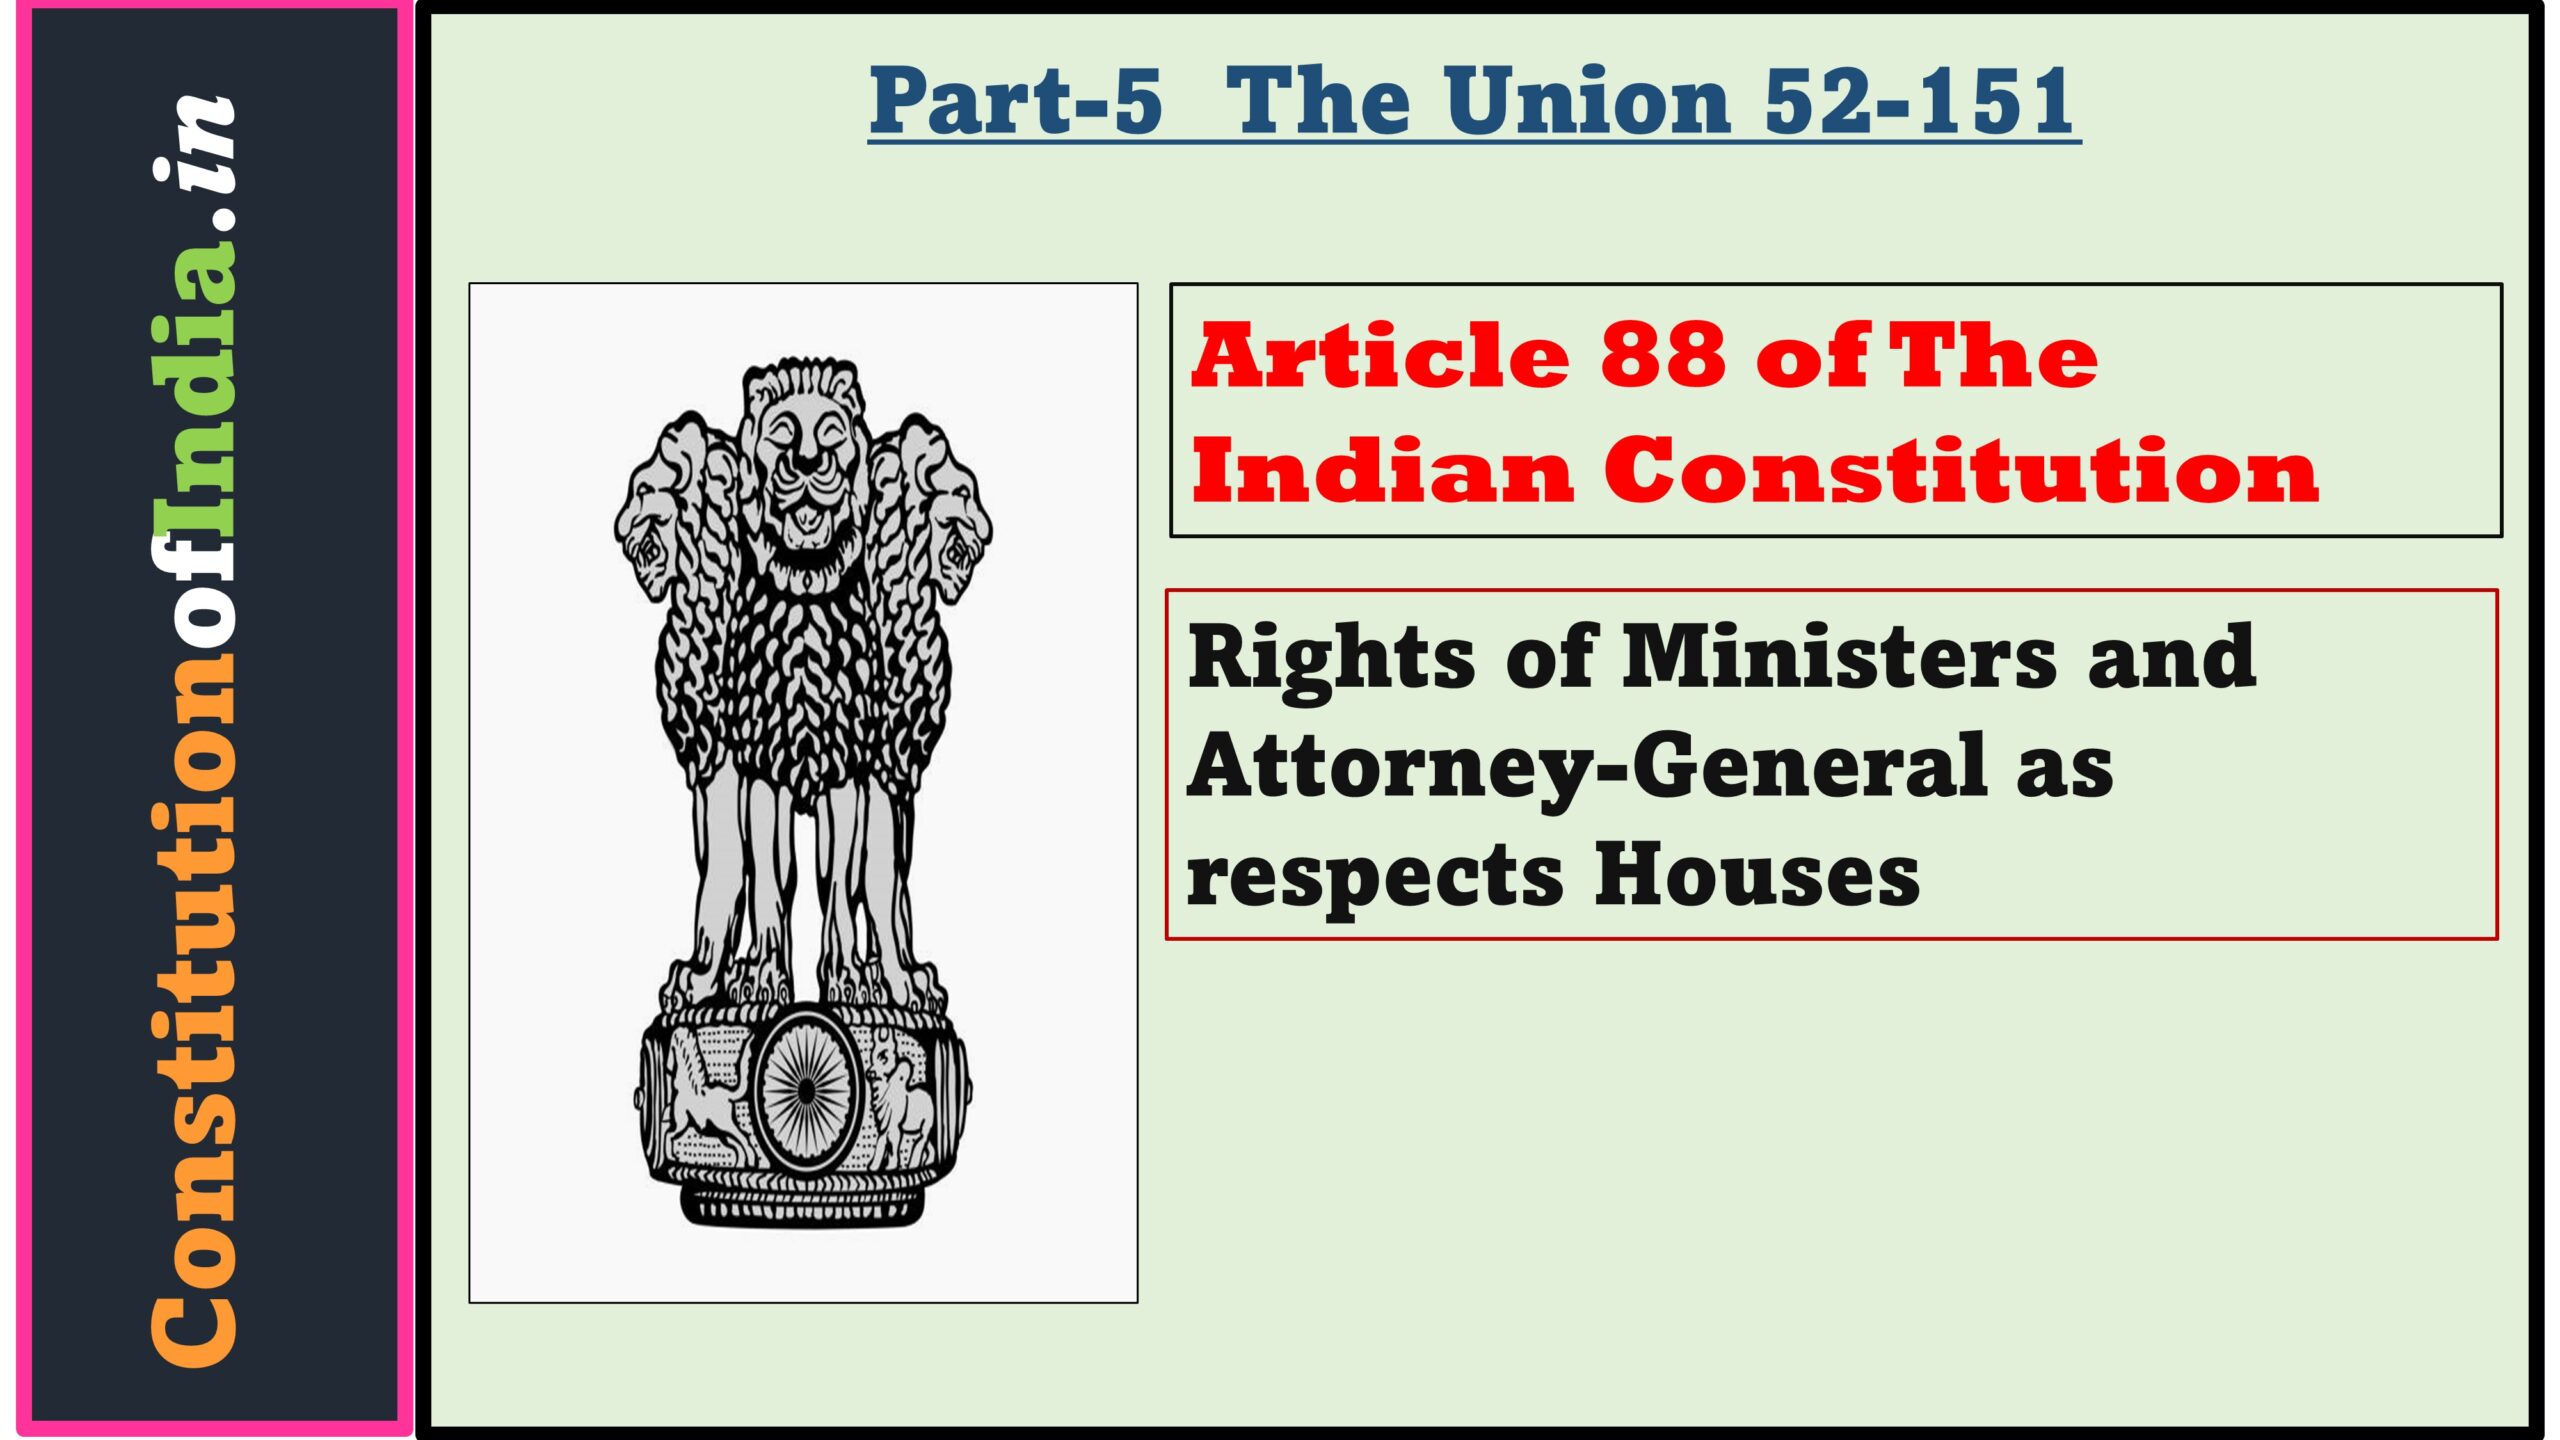 Article 88 of The Indian Constitution